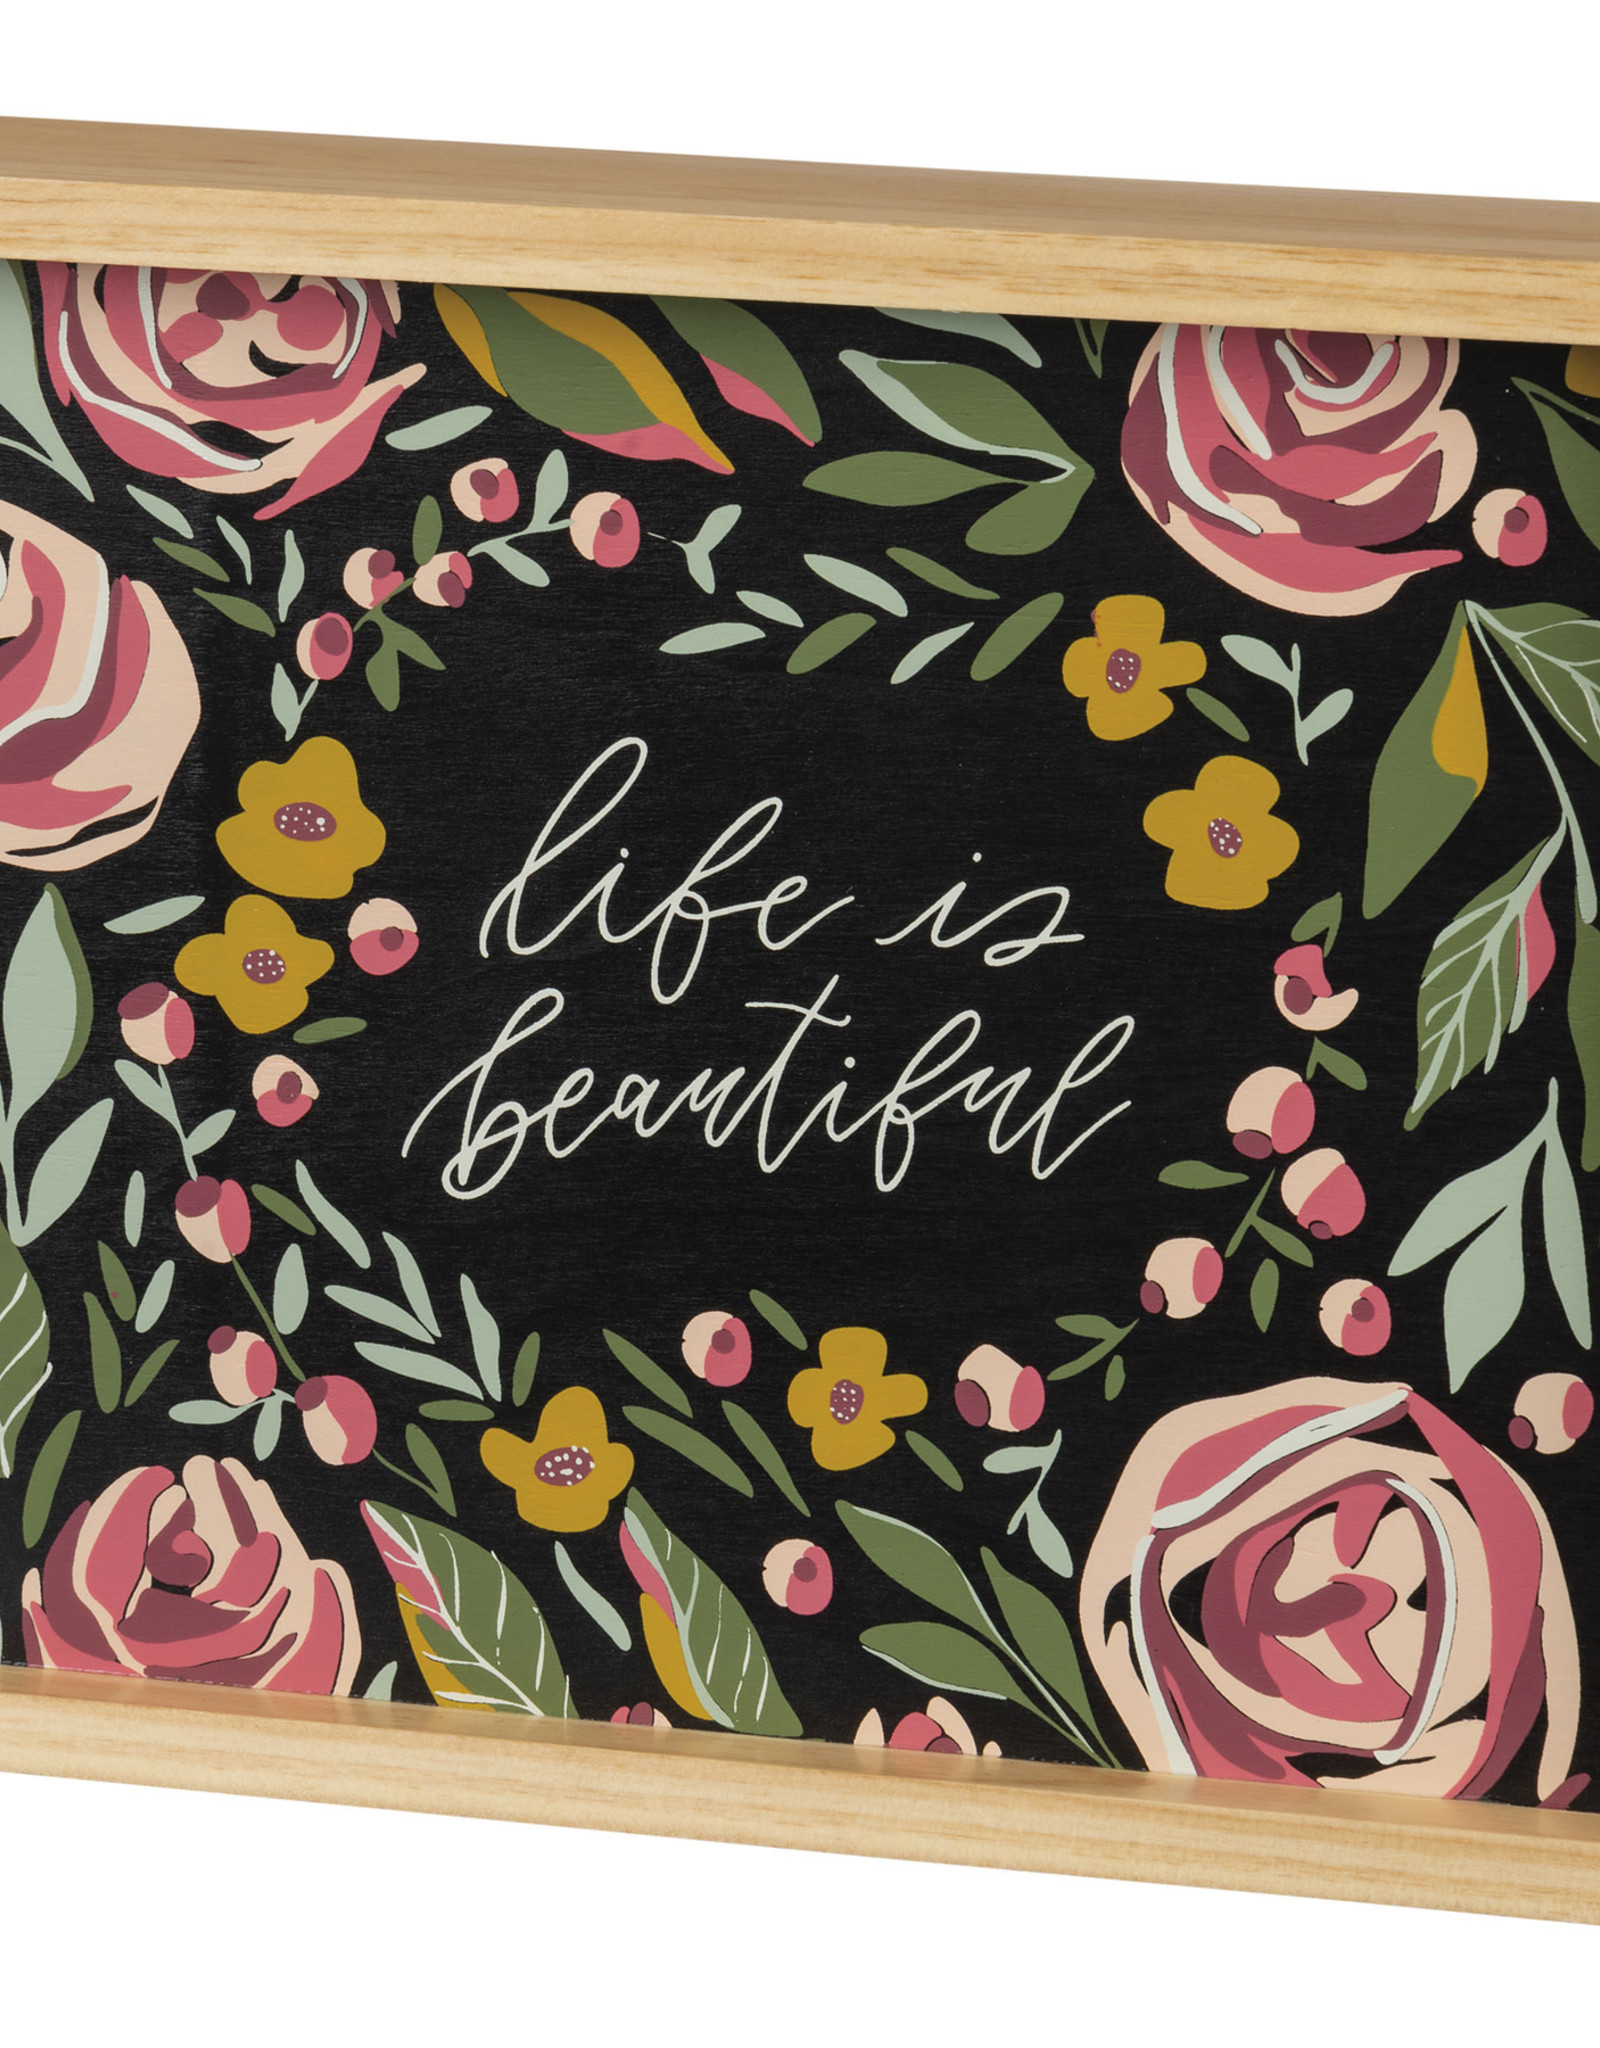 Inset Box Sign - Life Is Beautiful